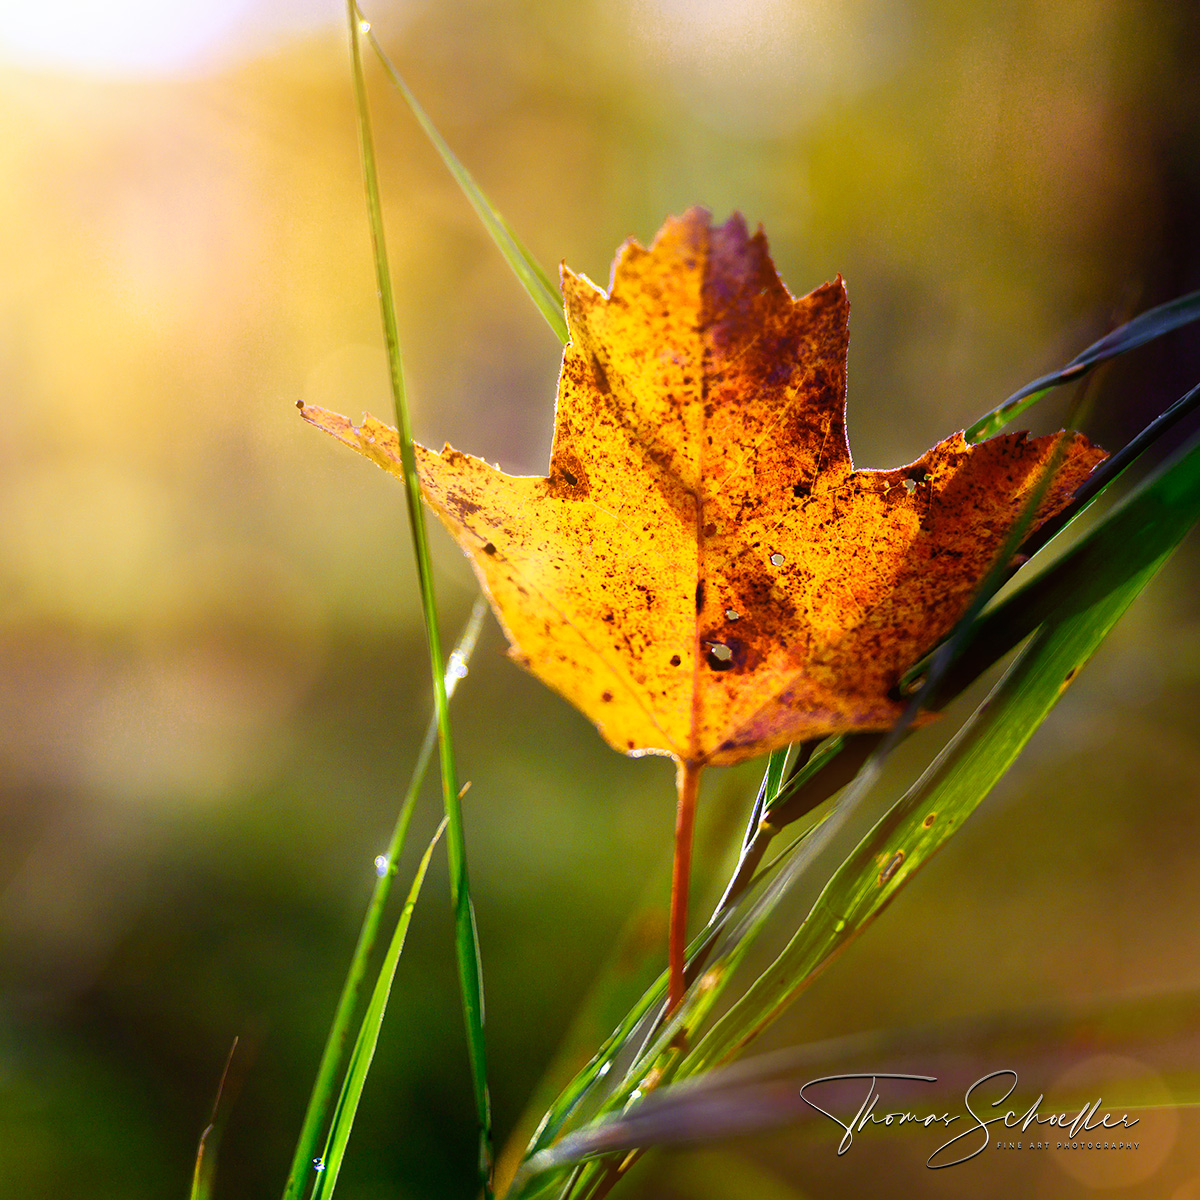 Autumnal Intimate Landscape of The Forest Floor | Expressive Nature Photography Fine Art Prints